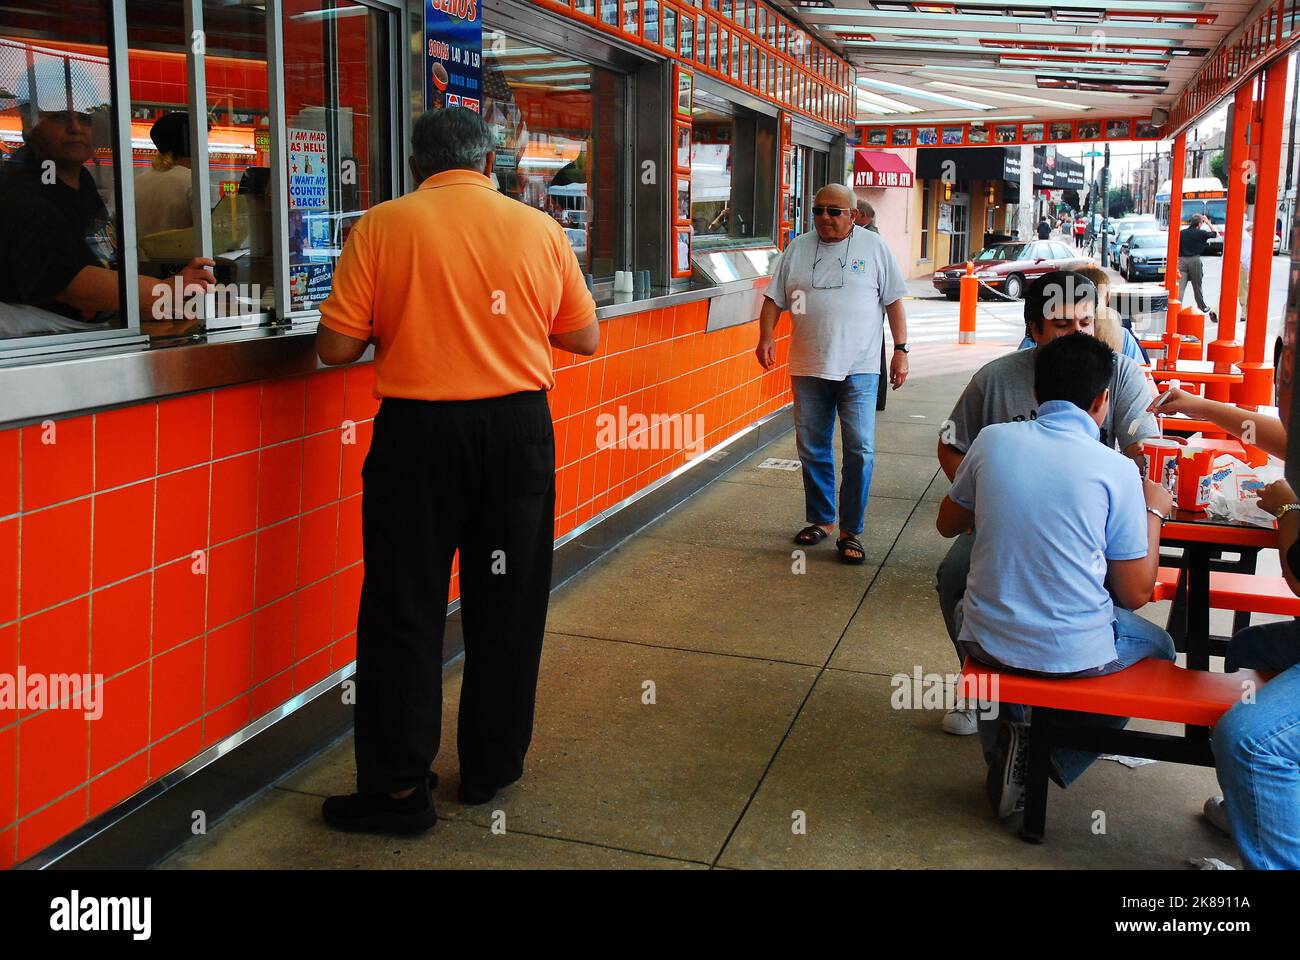 Customers enjoy a local South Philadelphia cheesesteak sandwich at Genos Steak, one of two rivals in South Philly Stock Photo